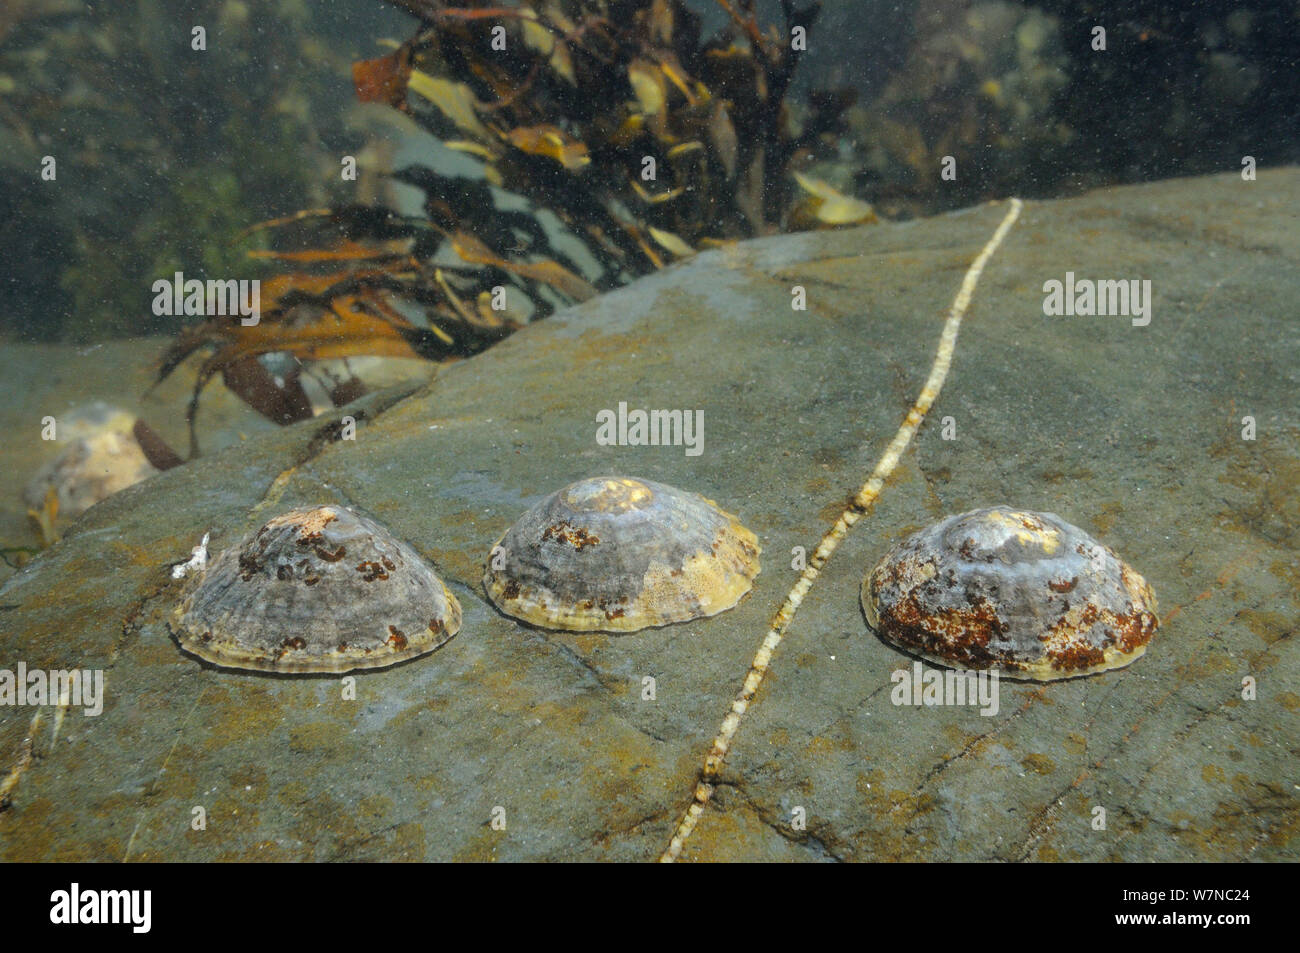 Three Common limpets (Patella vulgata) on the move on intertidal rock submerged at mid tide, Falmouth, Cornwall, UK, August. Stock Photo